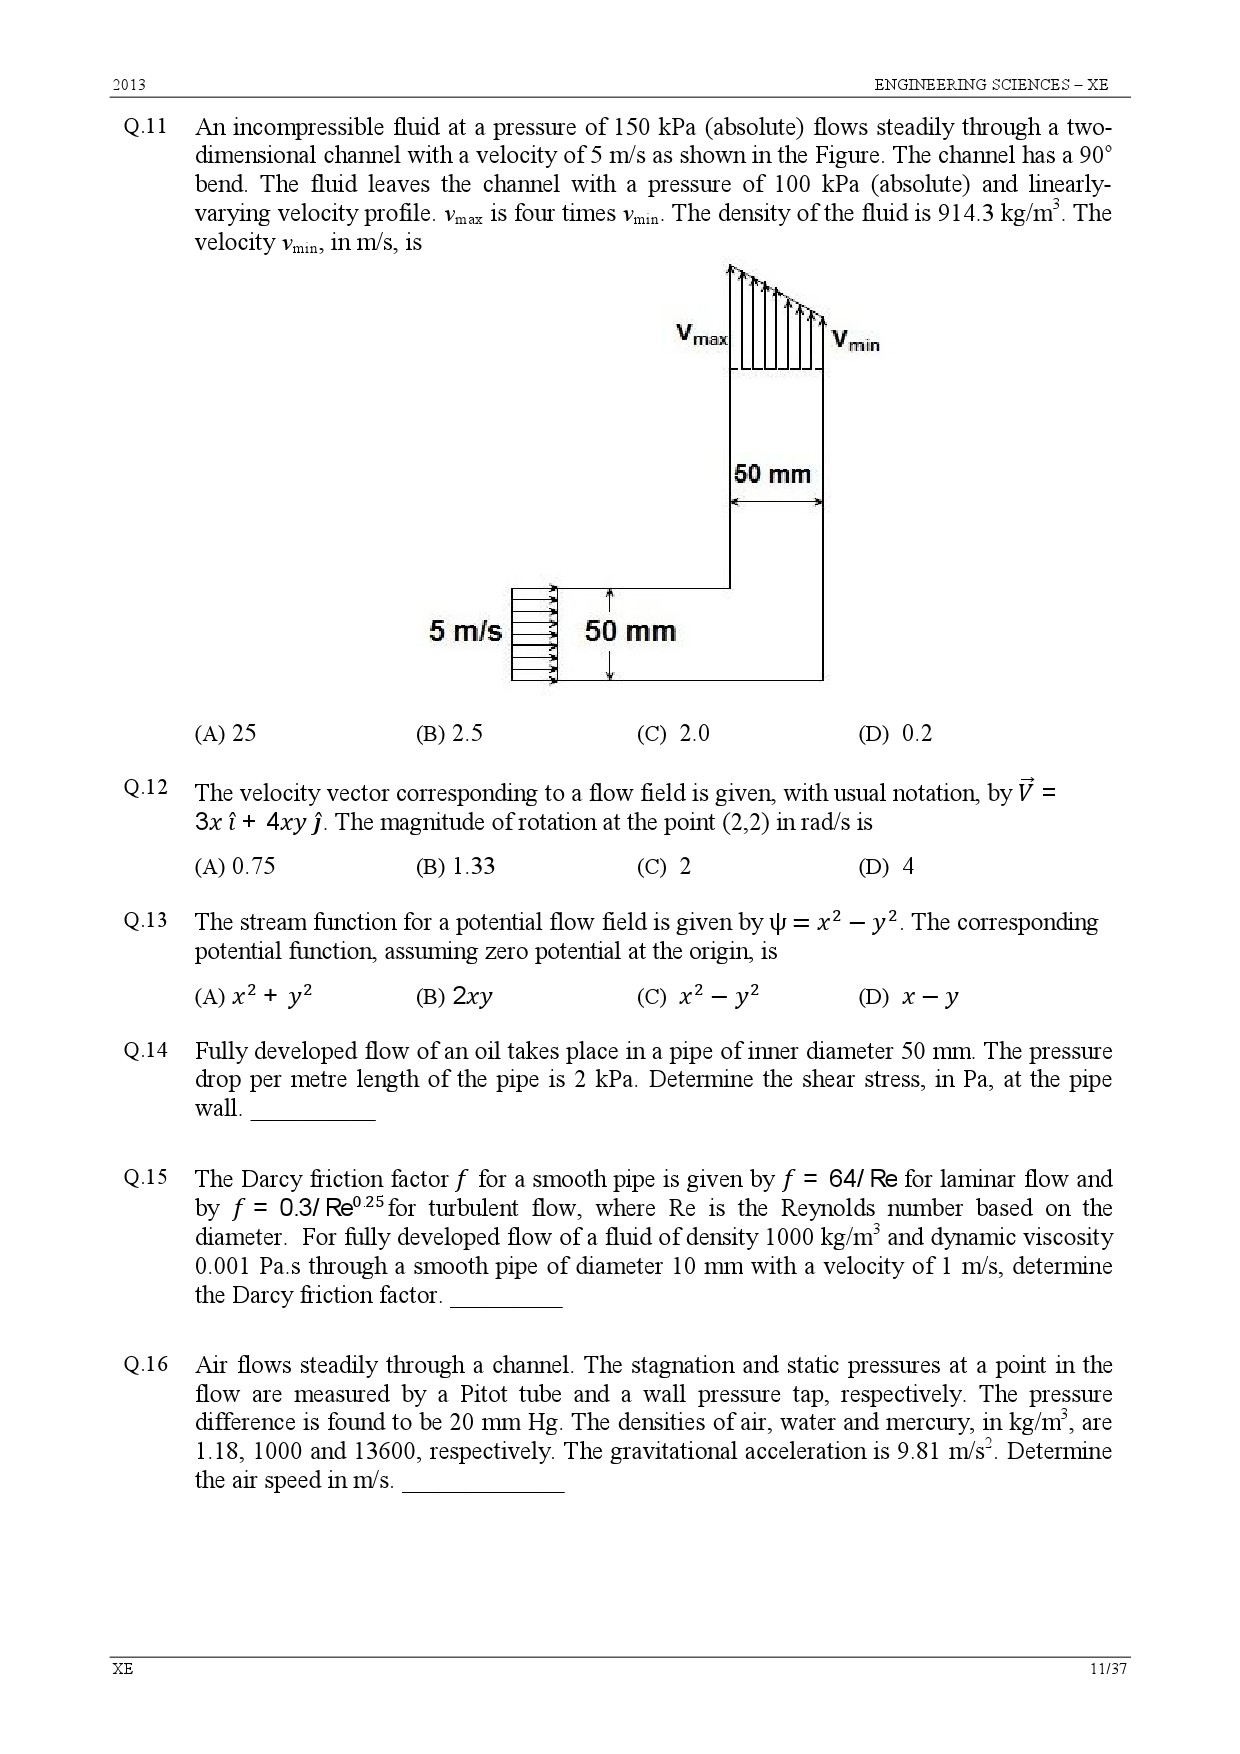 GATE Exam Question Paper 2013 Engineering Sciences 11